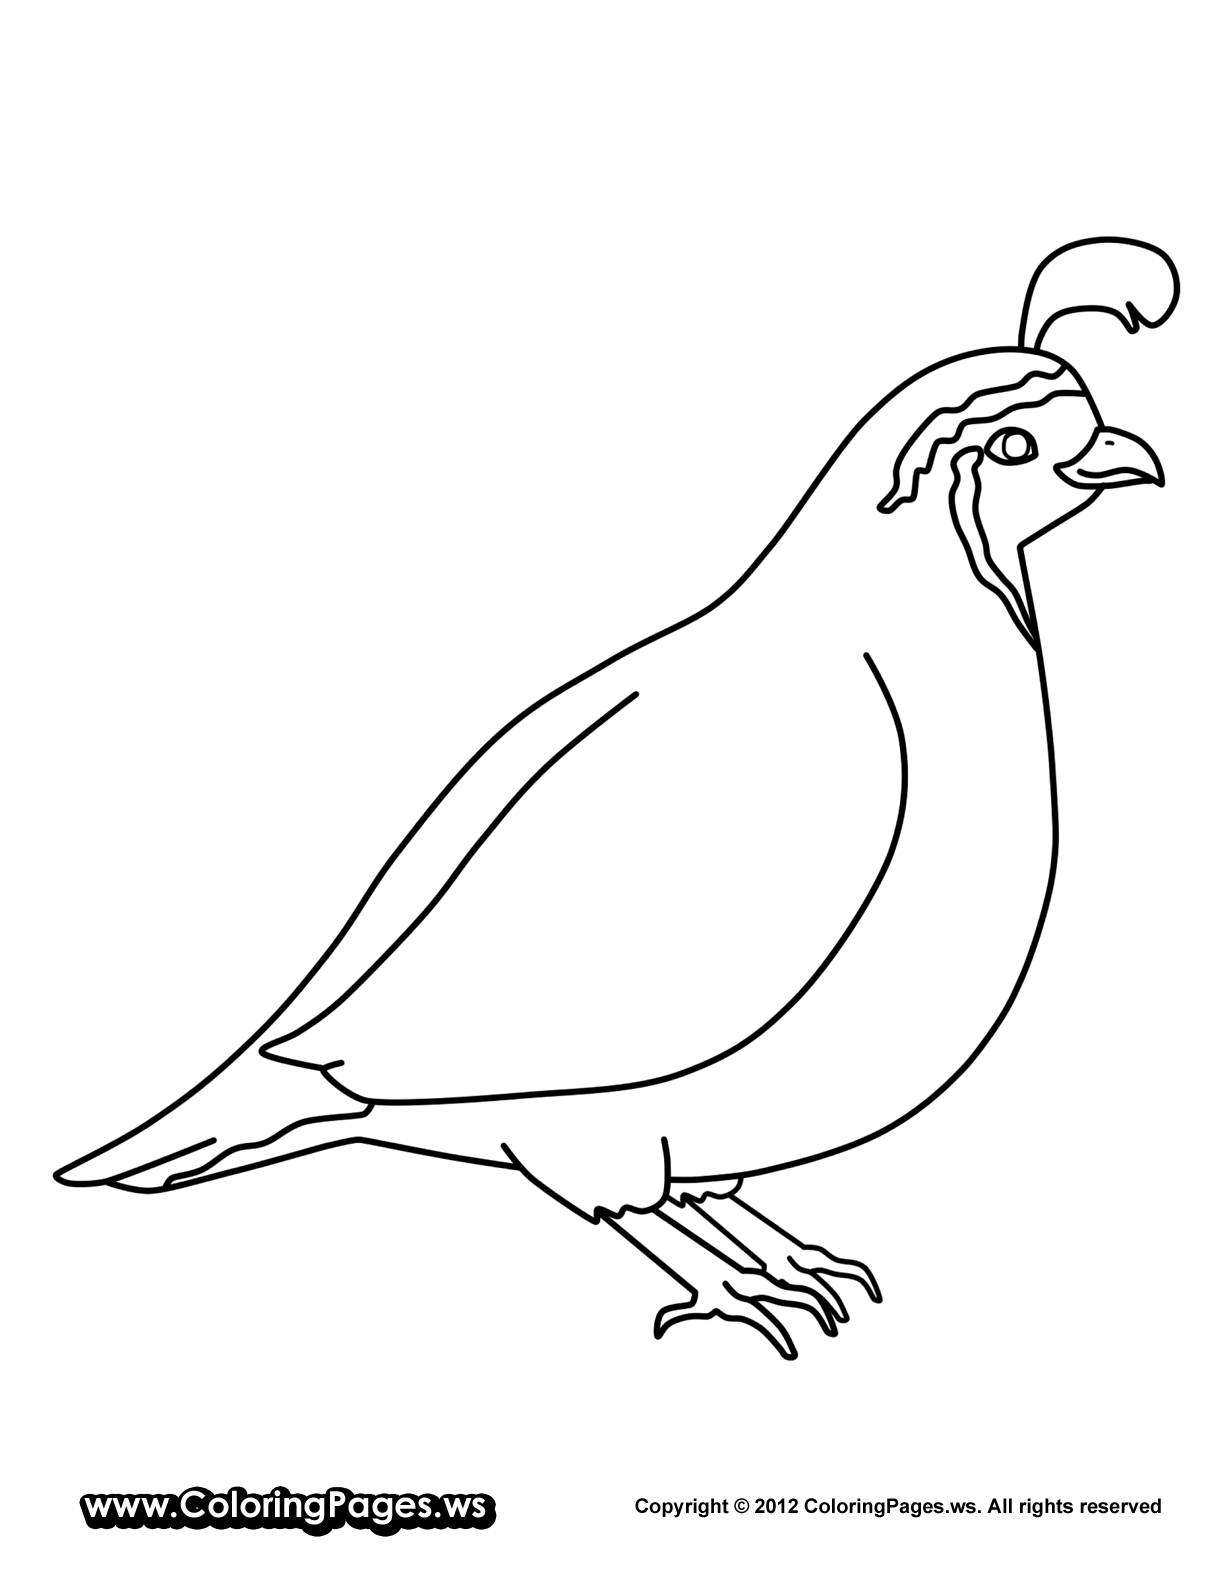 Download Quail Coloring Pages for Preschool - Preschool and ...